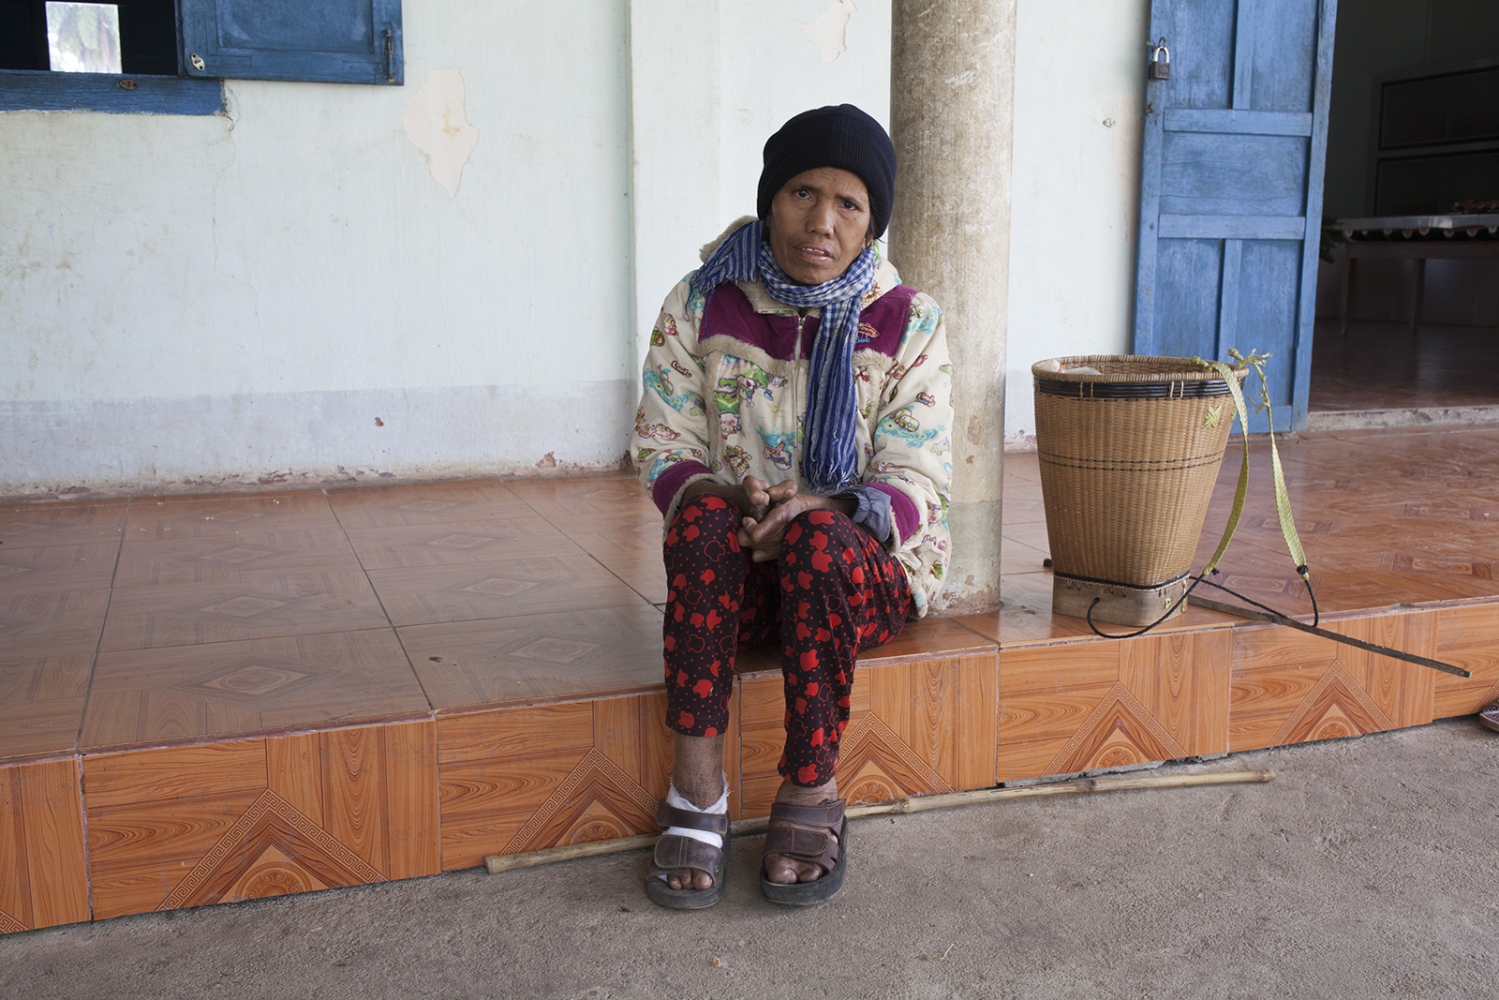  This is GlÃ¢i one of the ladies in the colony that has had the disease for a while and therefor...